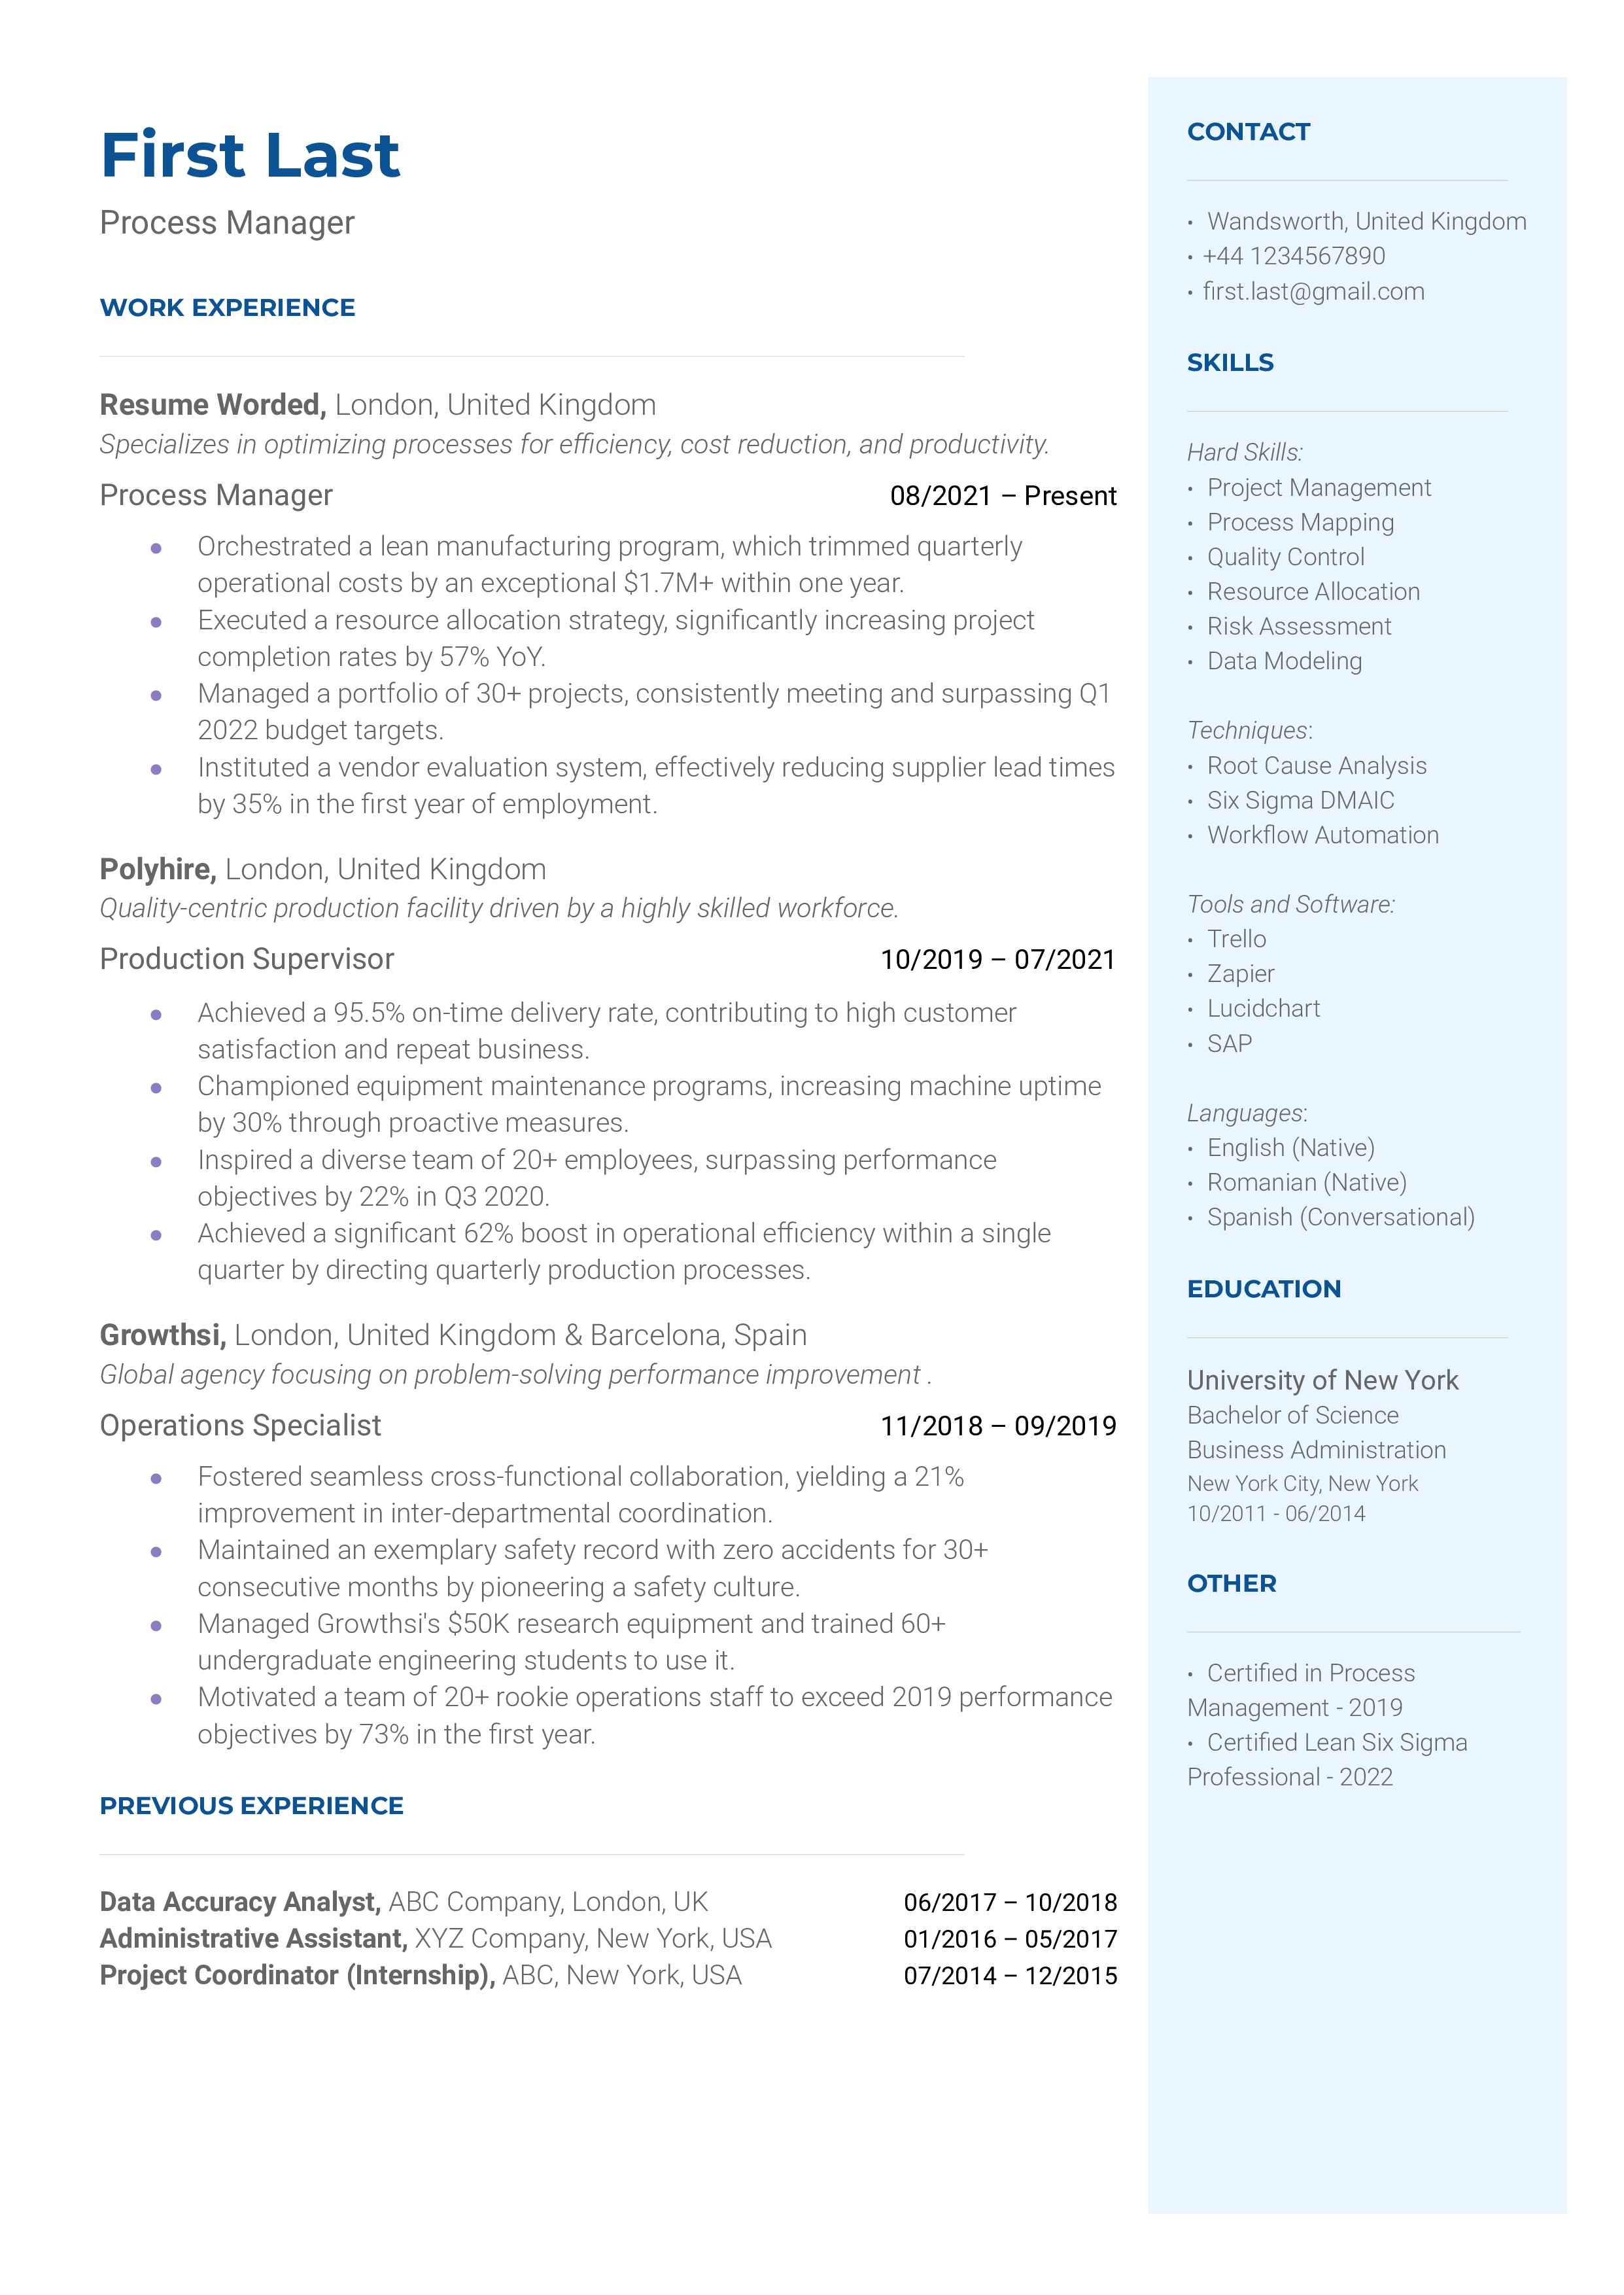 Process Manager Resume Sample